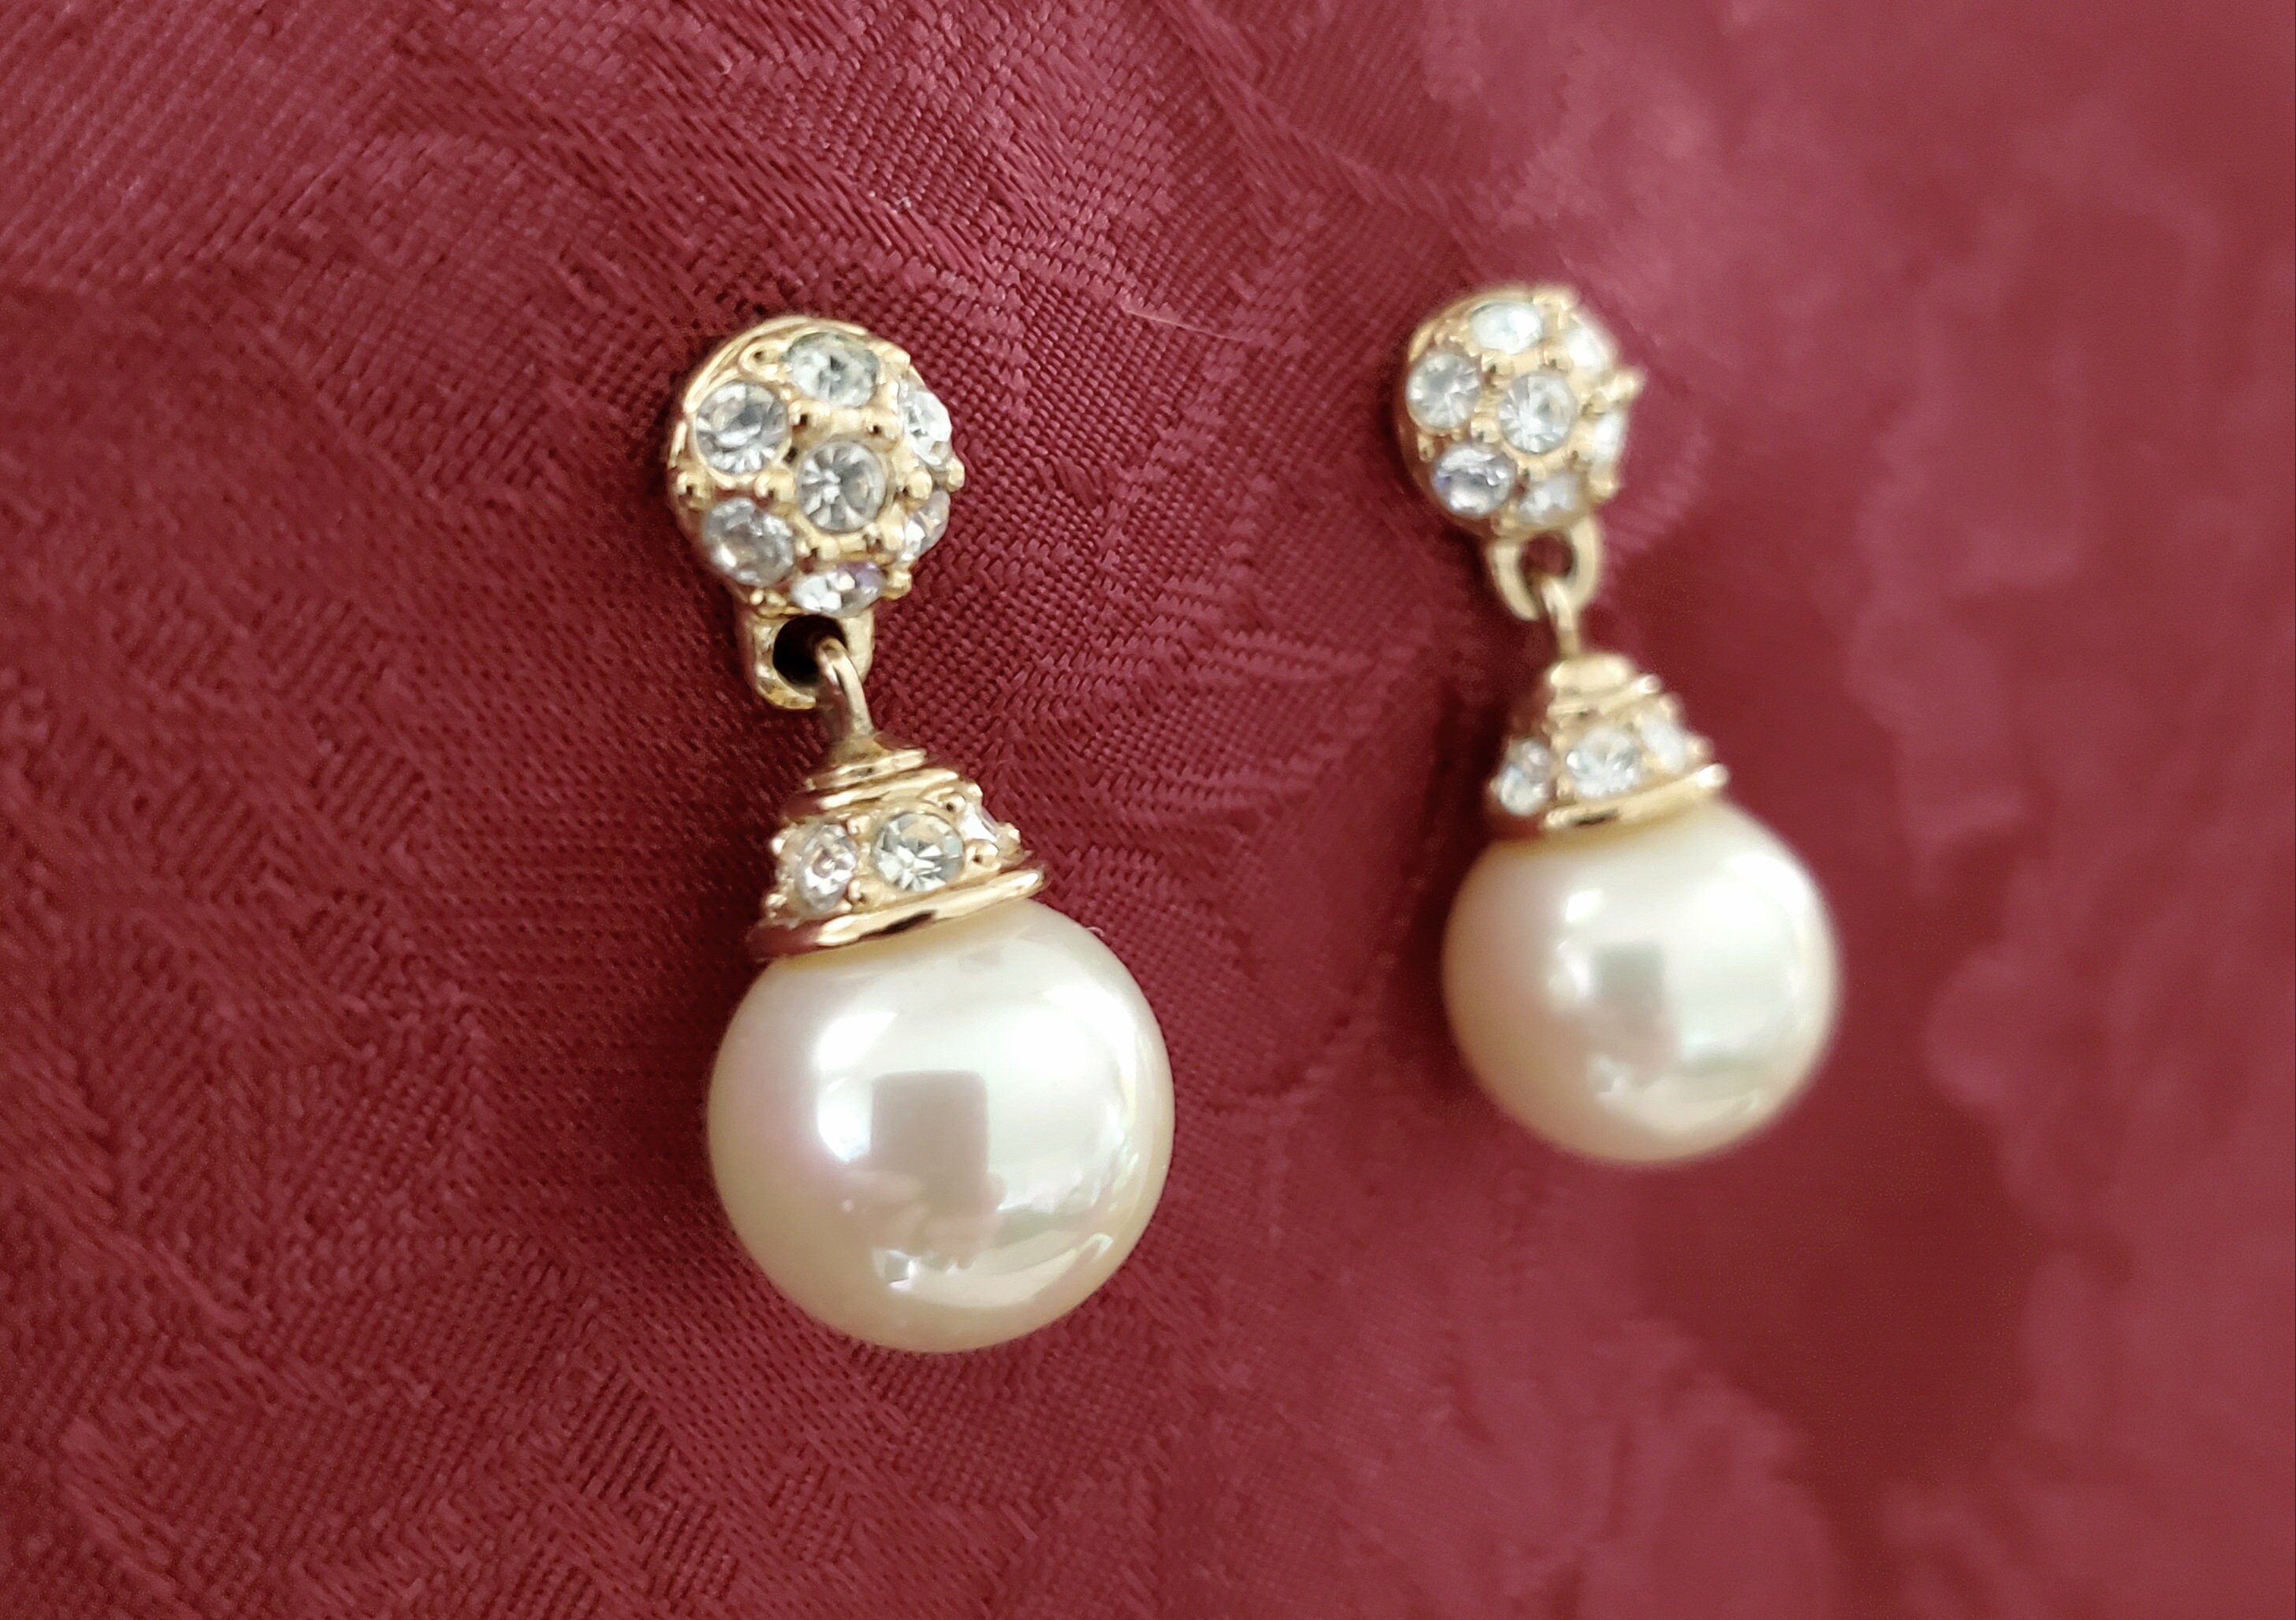 Vintage Post Dangle Earrings With Large Pearls and Crystals - Etsy